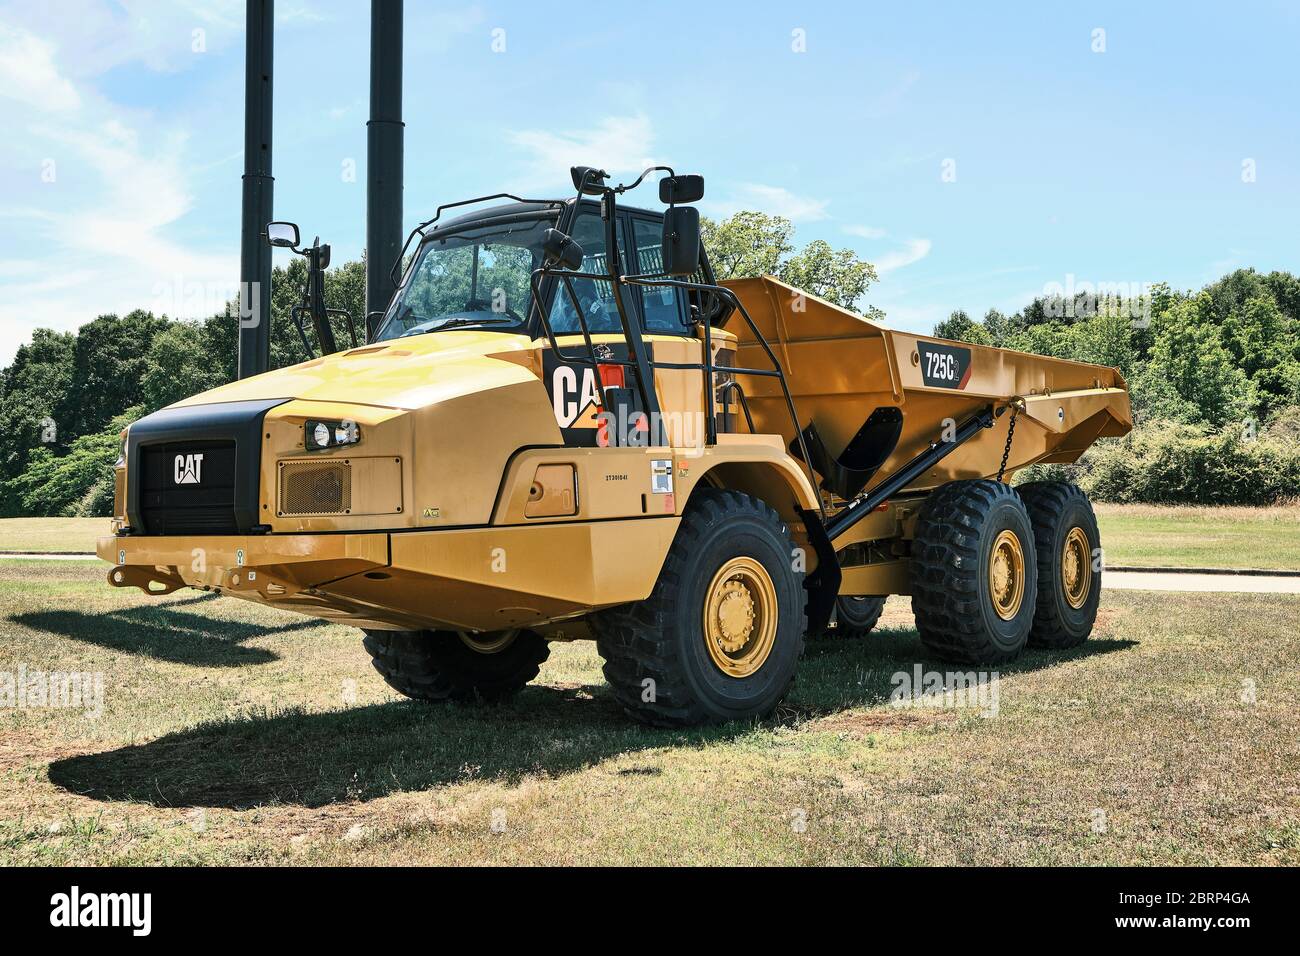 New CAT 725C2 articulated earth mover or hauler on display in front of a Caterpillar heavy equipment sales lot in Montgomery Alabama, USA. Stock Photo